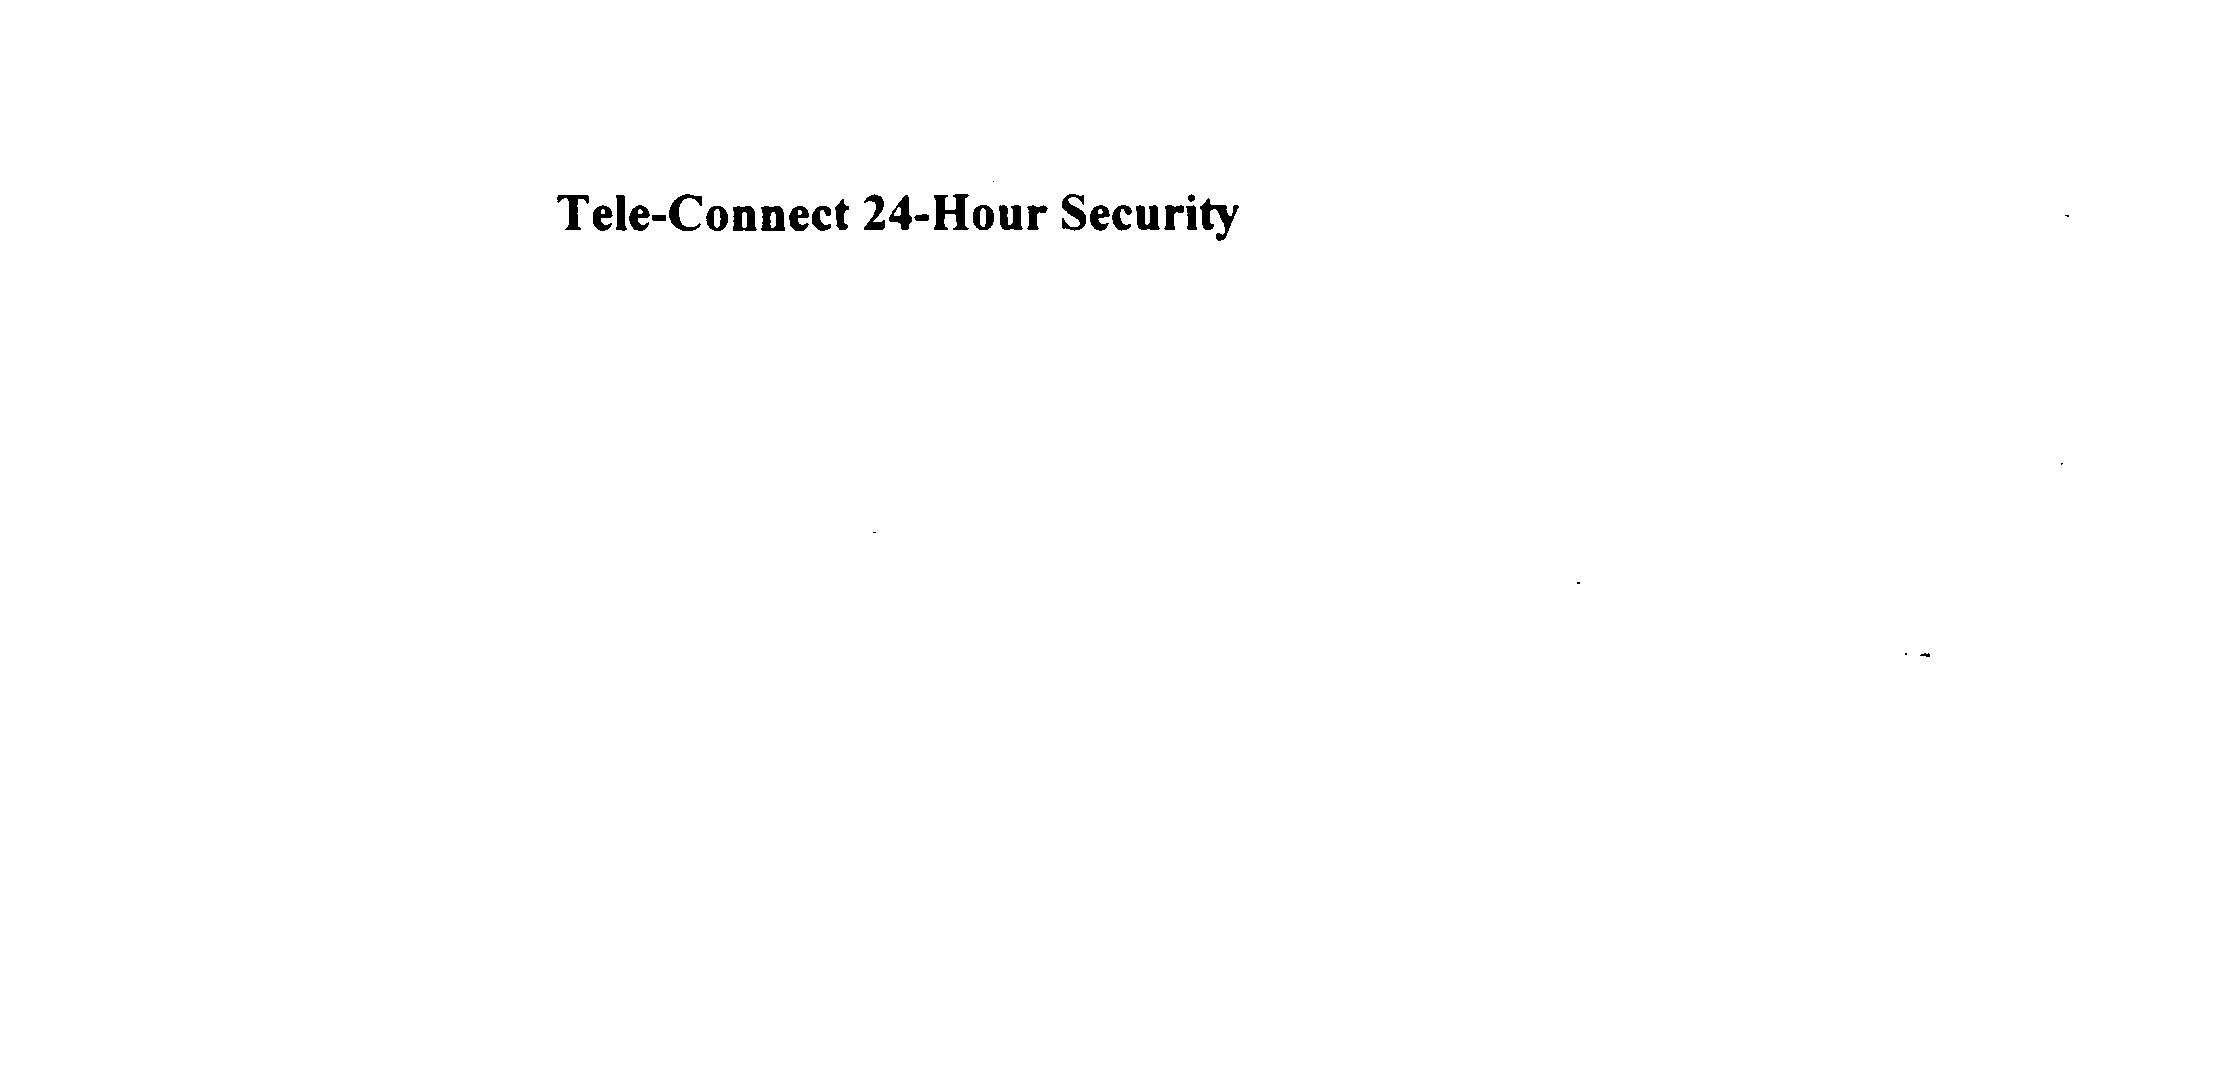  TELE-CONNECT 24-HOUR SECURITY